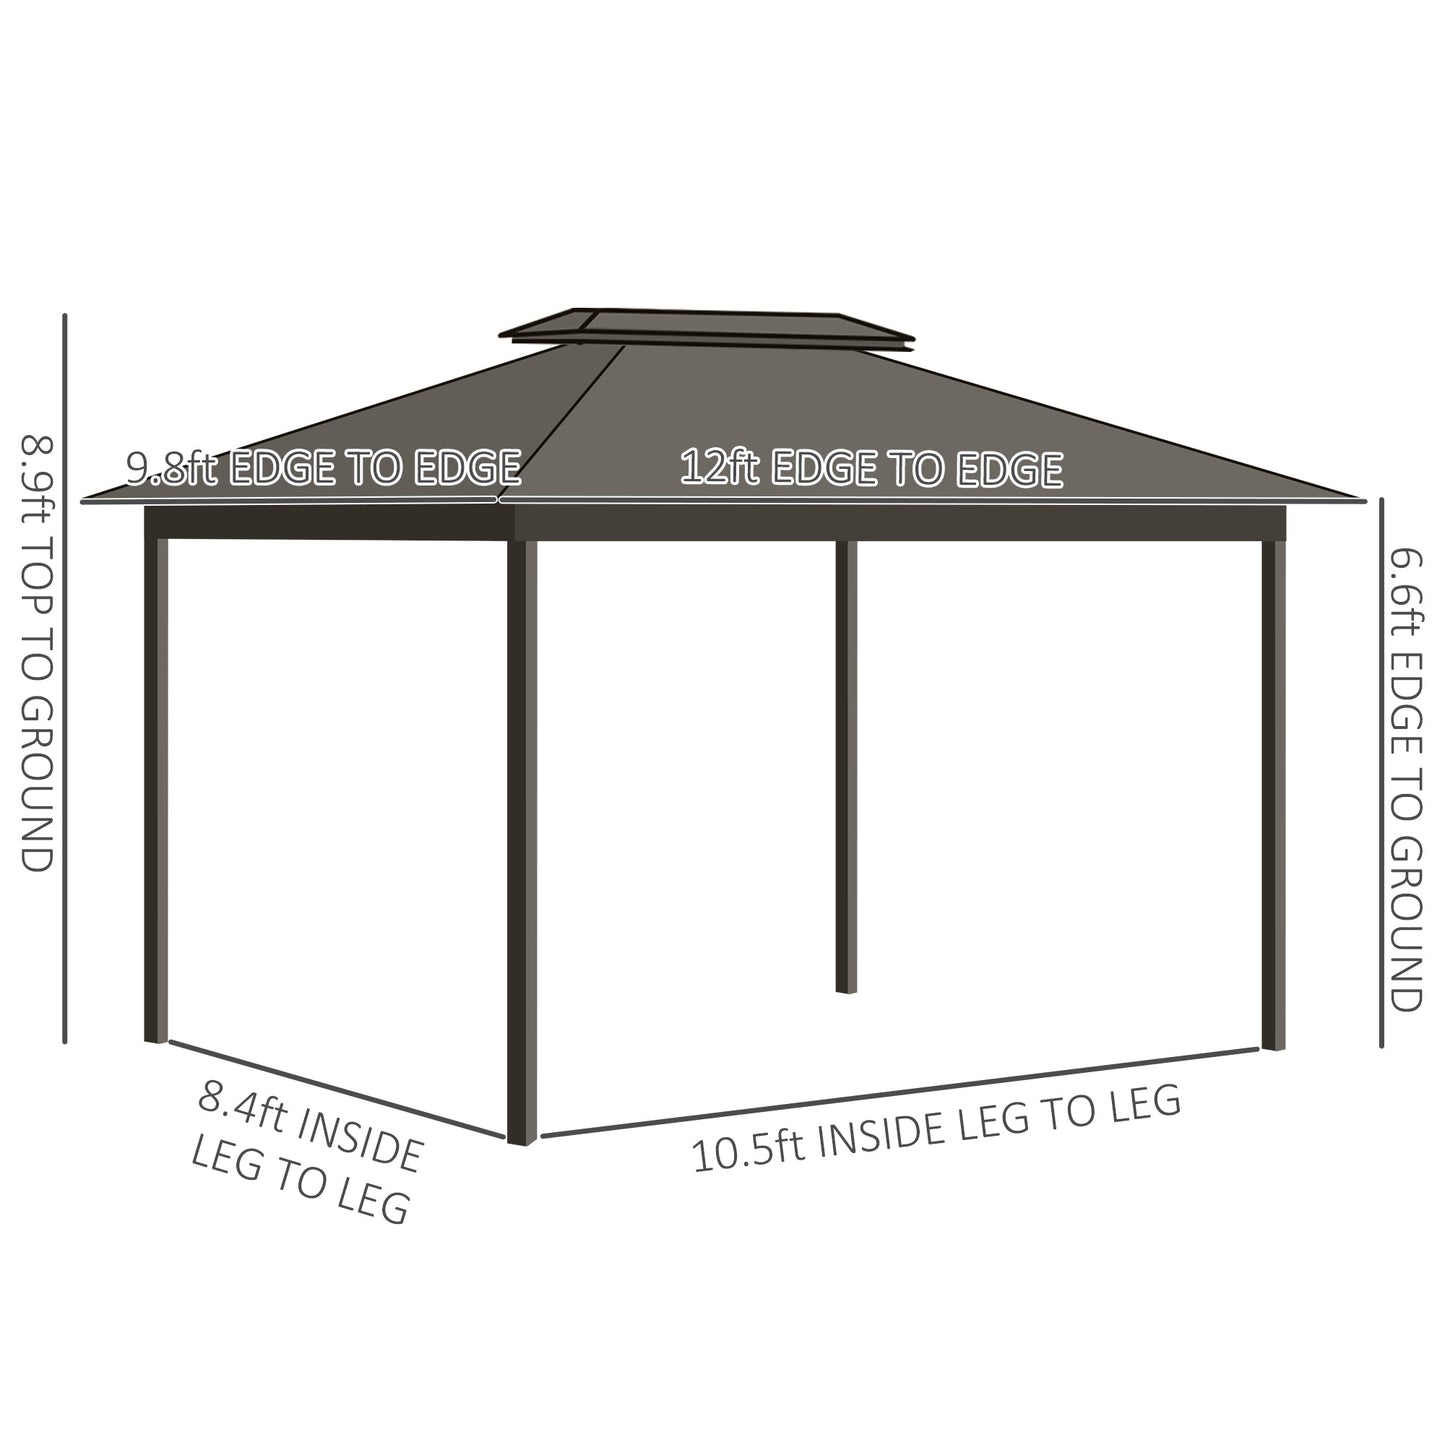 Outdoor and Garden-10x12 Hardtop Gazebo with Aluminum Frame, Permanent Metal Roof Gazebo Canopy w/ Curtains & Netting for Garden, Patio, Backyard, Grey - Outdoor Style Company